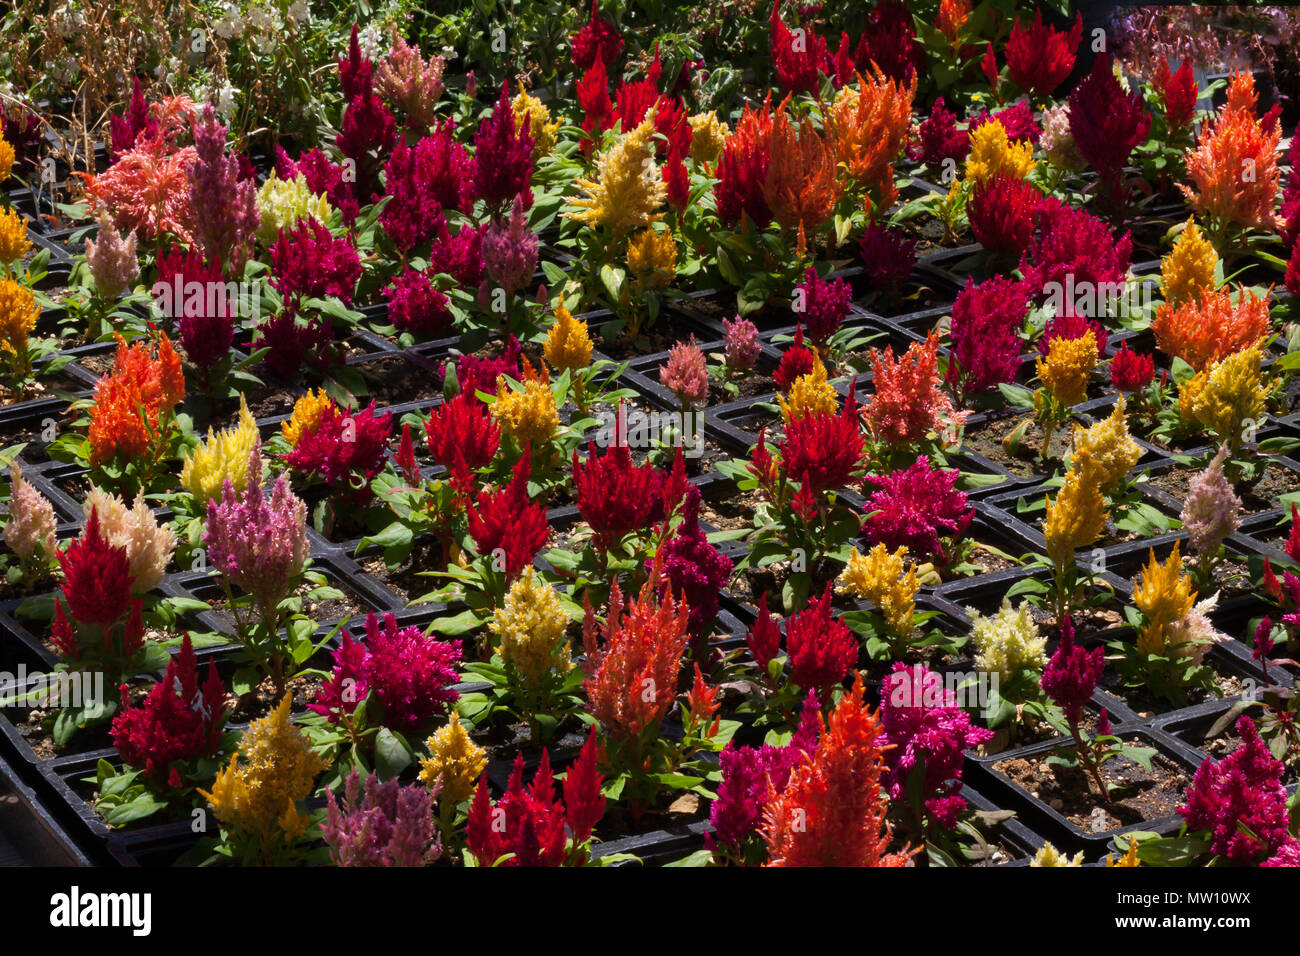 Colorful Red Yellow and Purple Flowers in Trays Stock Photo